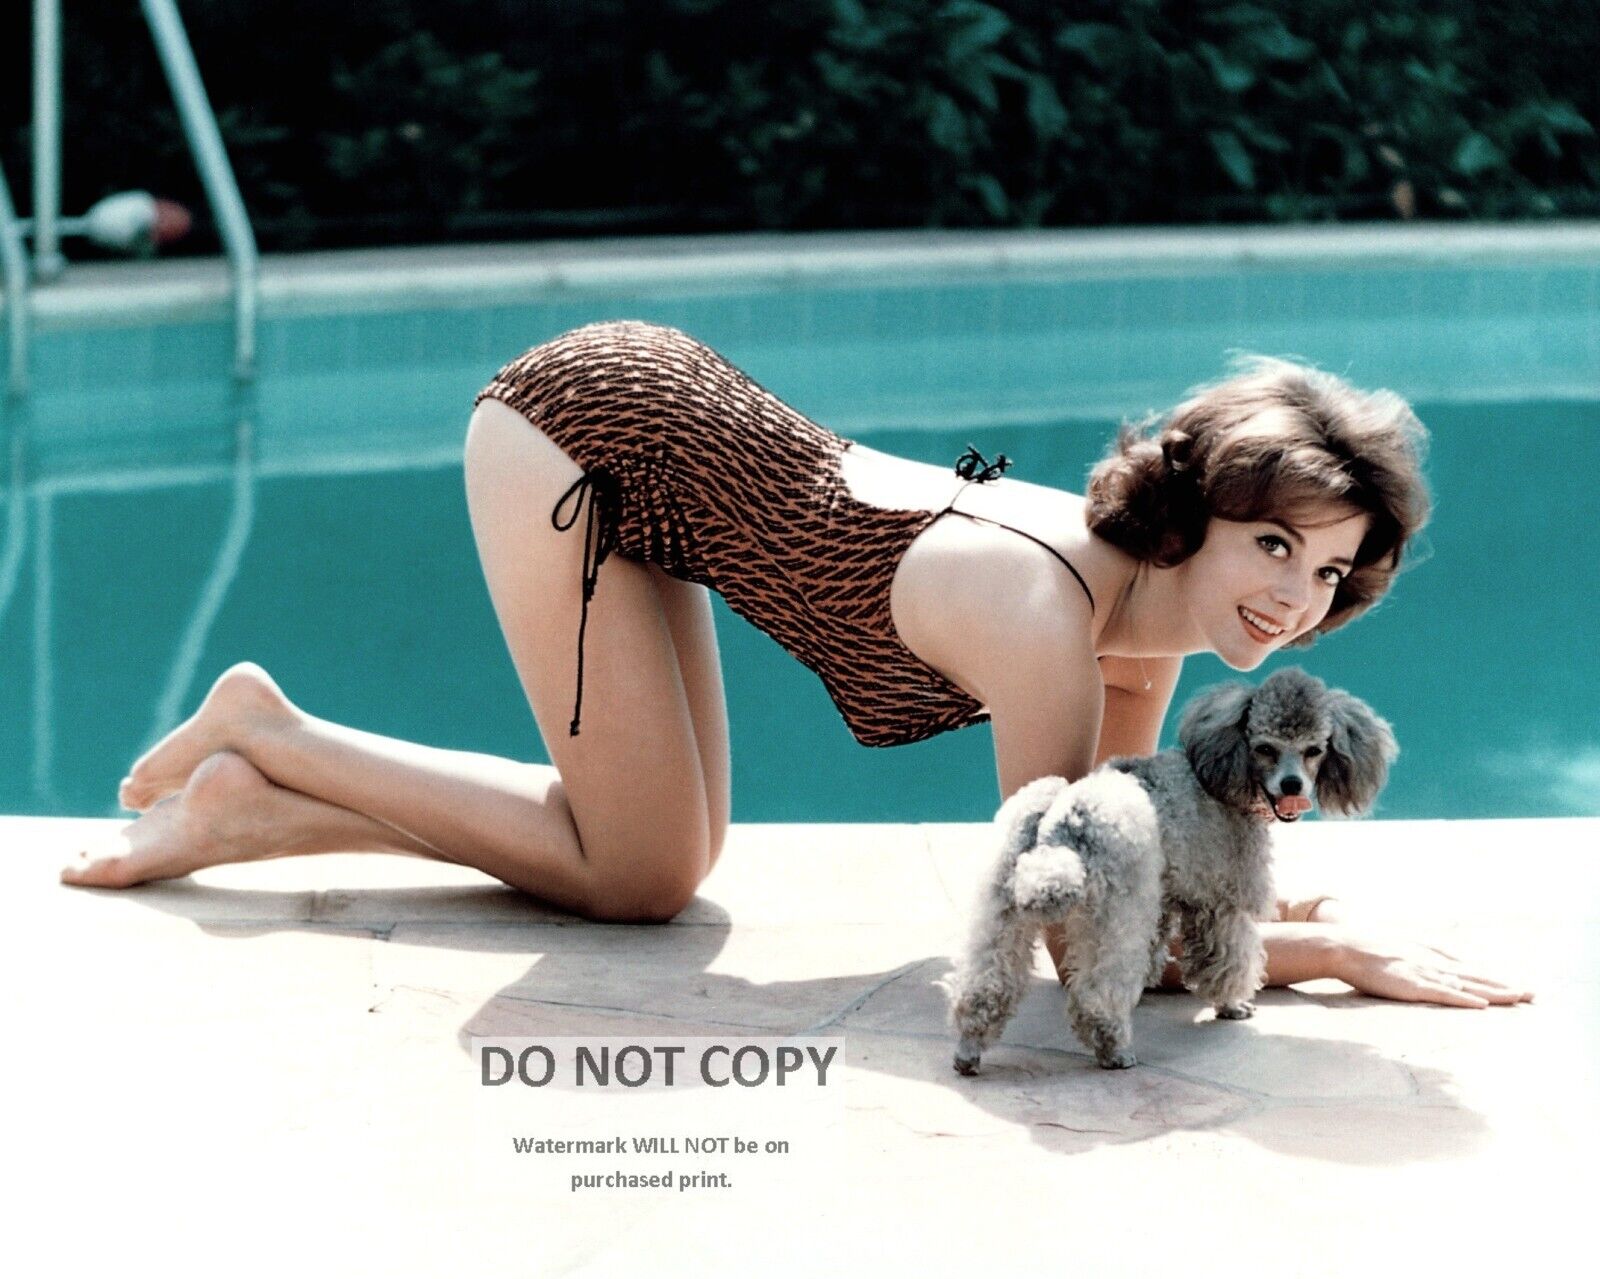 ACTRESS NATALIE WOOD PIN UP WITH K-9 FRIEND DOG - 8X10 PUBLICITY PHOTO (ZZ-955)